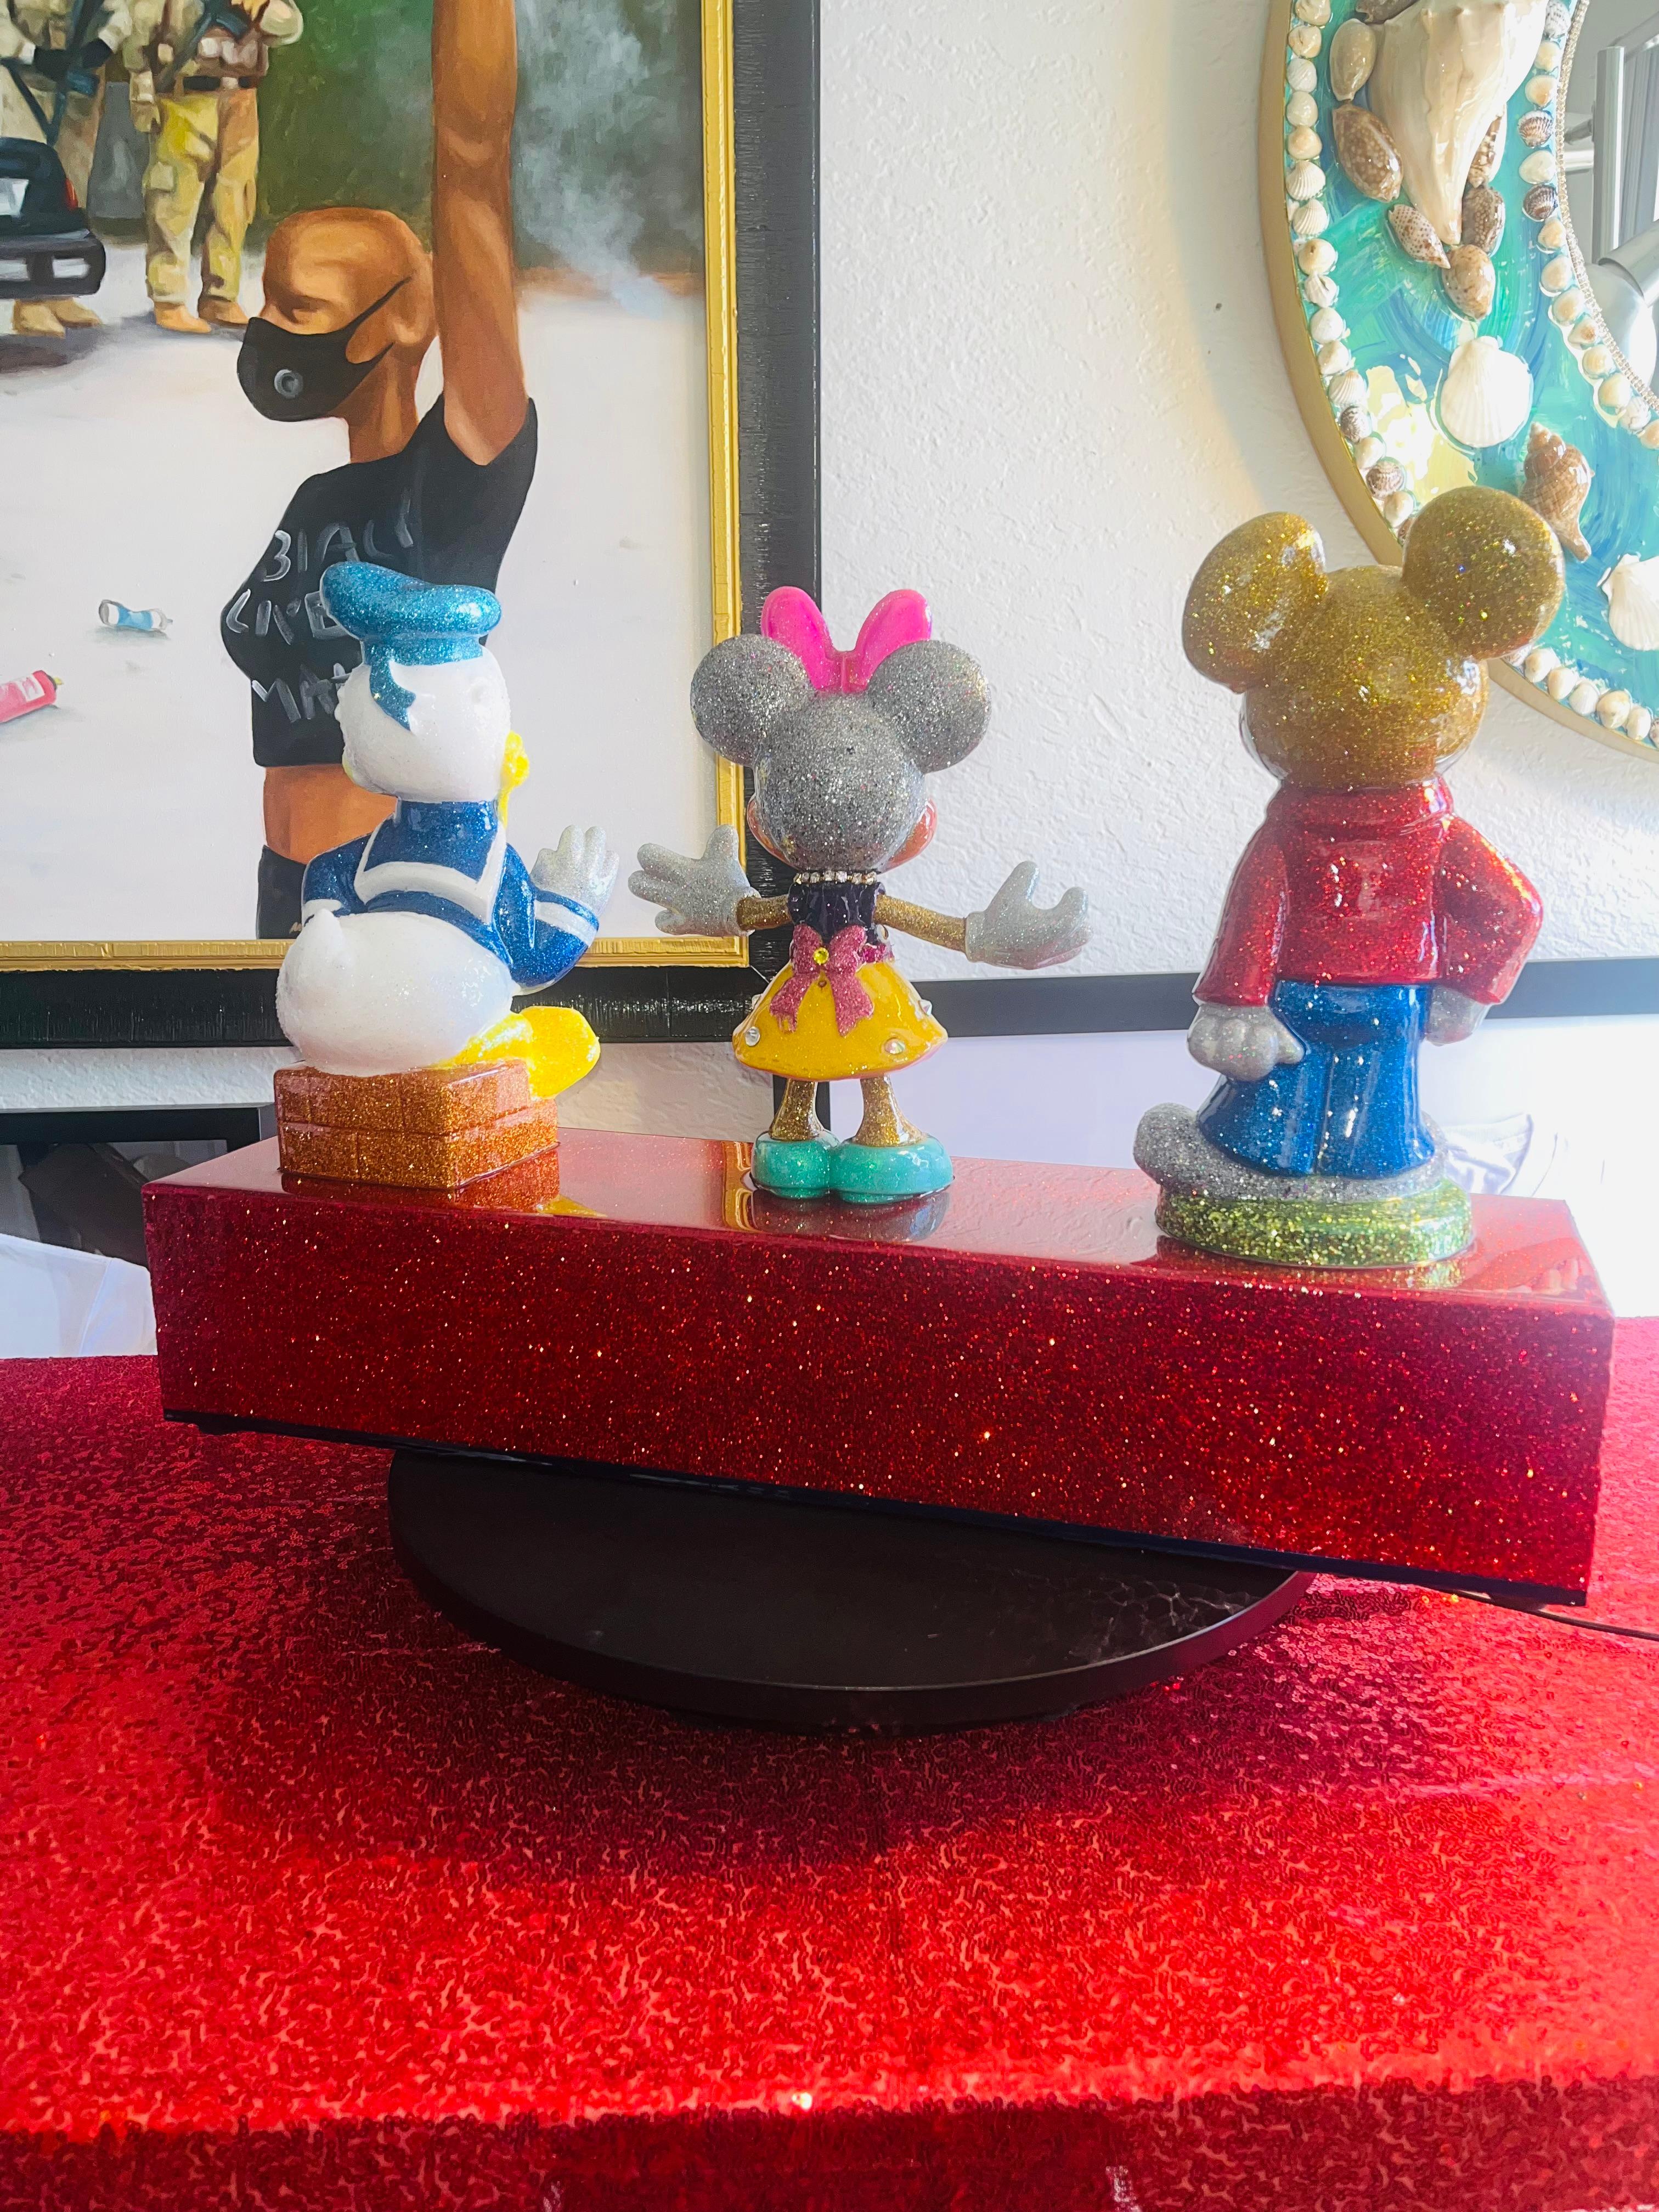                  **ANNUAL SUPER SALE UNTIL MAY 15TH ONLY**
*This Price Won't Be Repeated Again This Year - Take Advantage Of It*

TRIO AMIGOS is the collectors' Toy/Disney pieces must have because it is unique in creation and technique; you won't